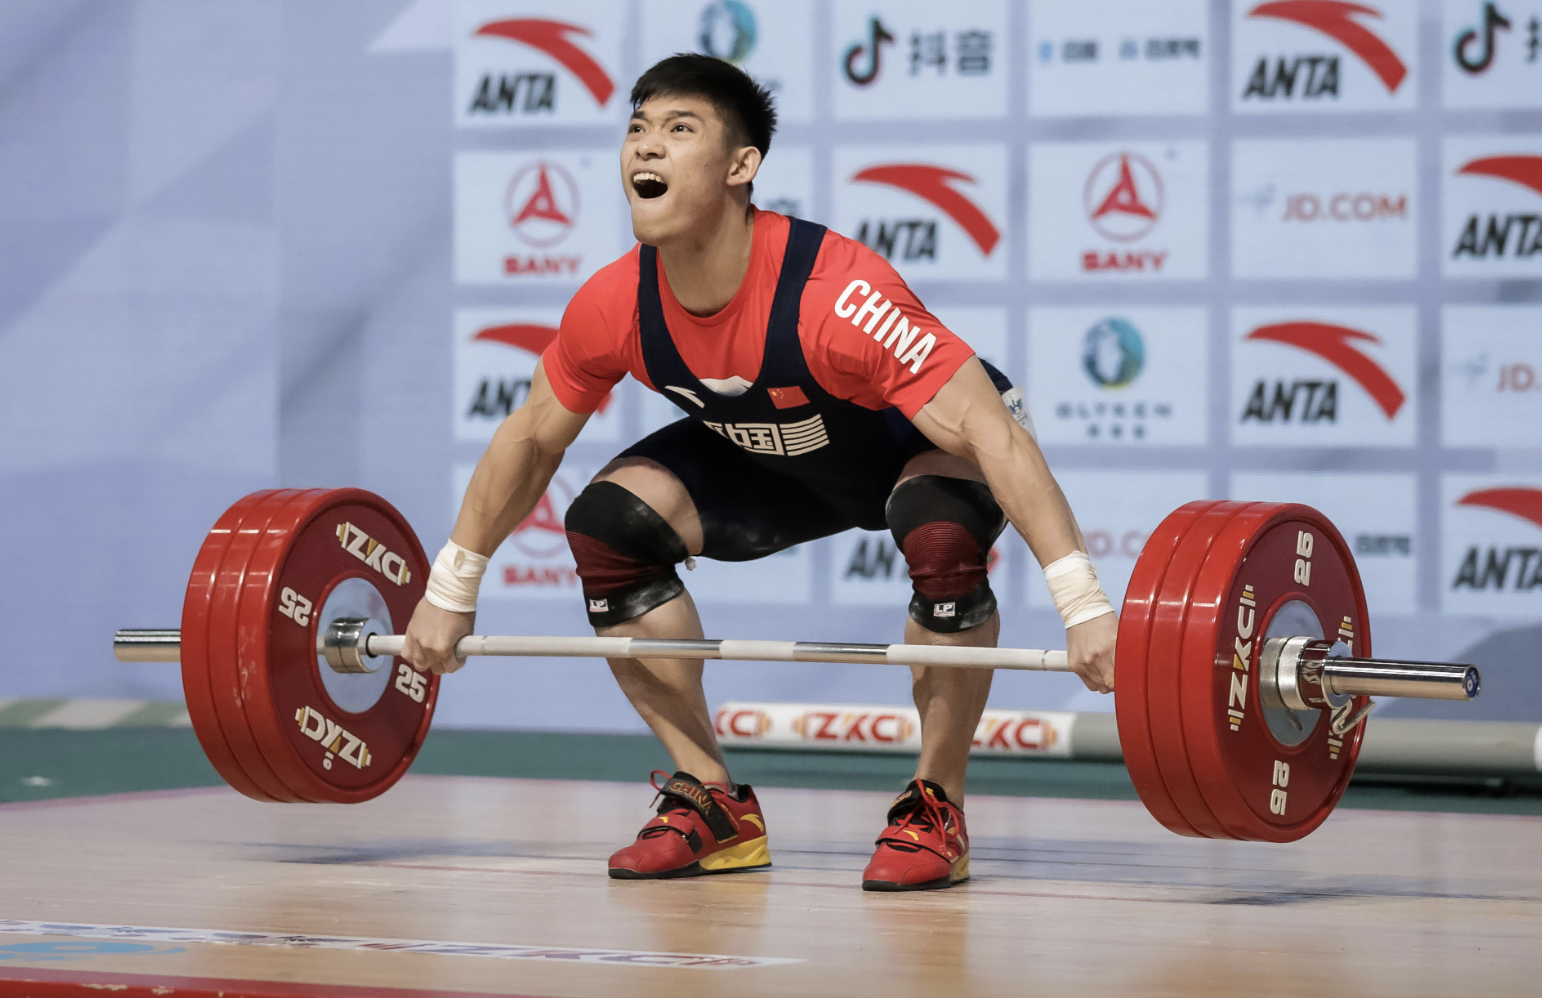 The Asian Weightlifting Federation is set to use ZKC equipment at all of its competitions as part of the four-year deal ©ZKC